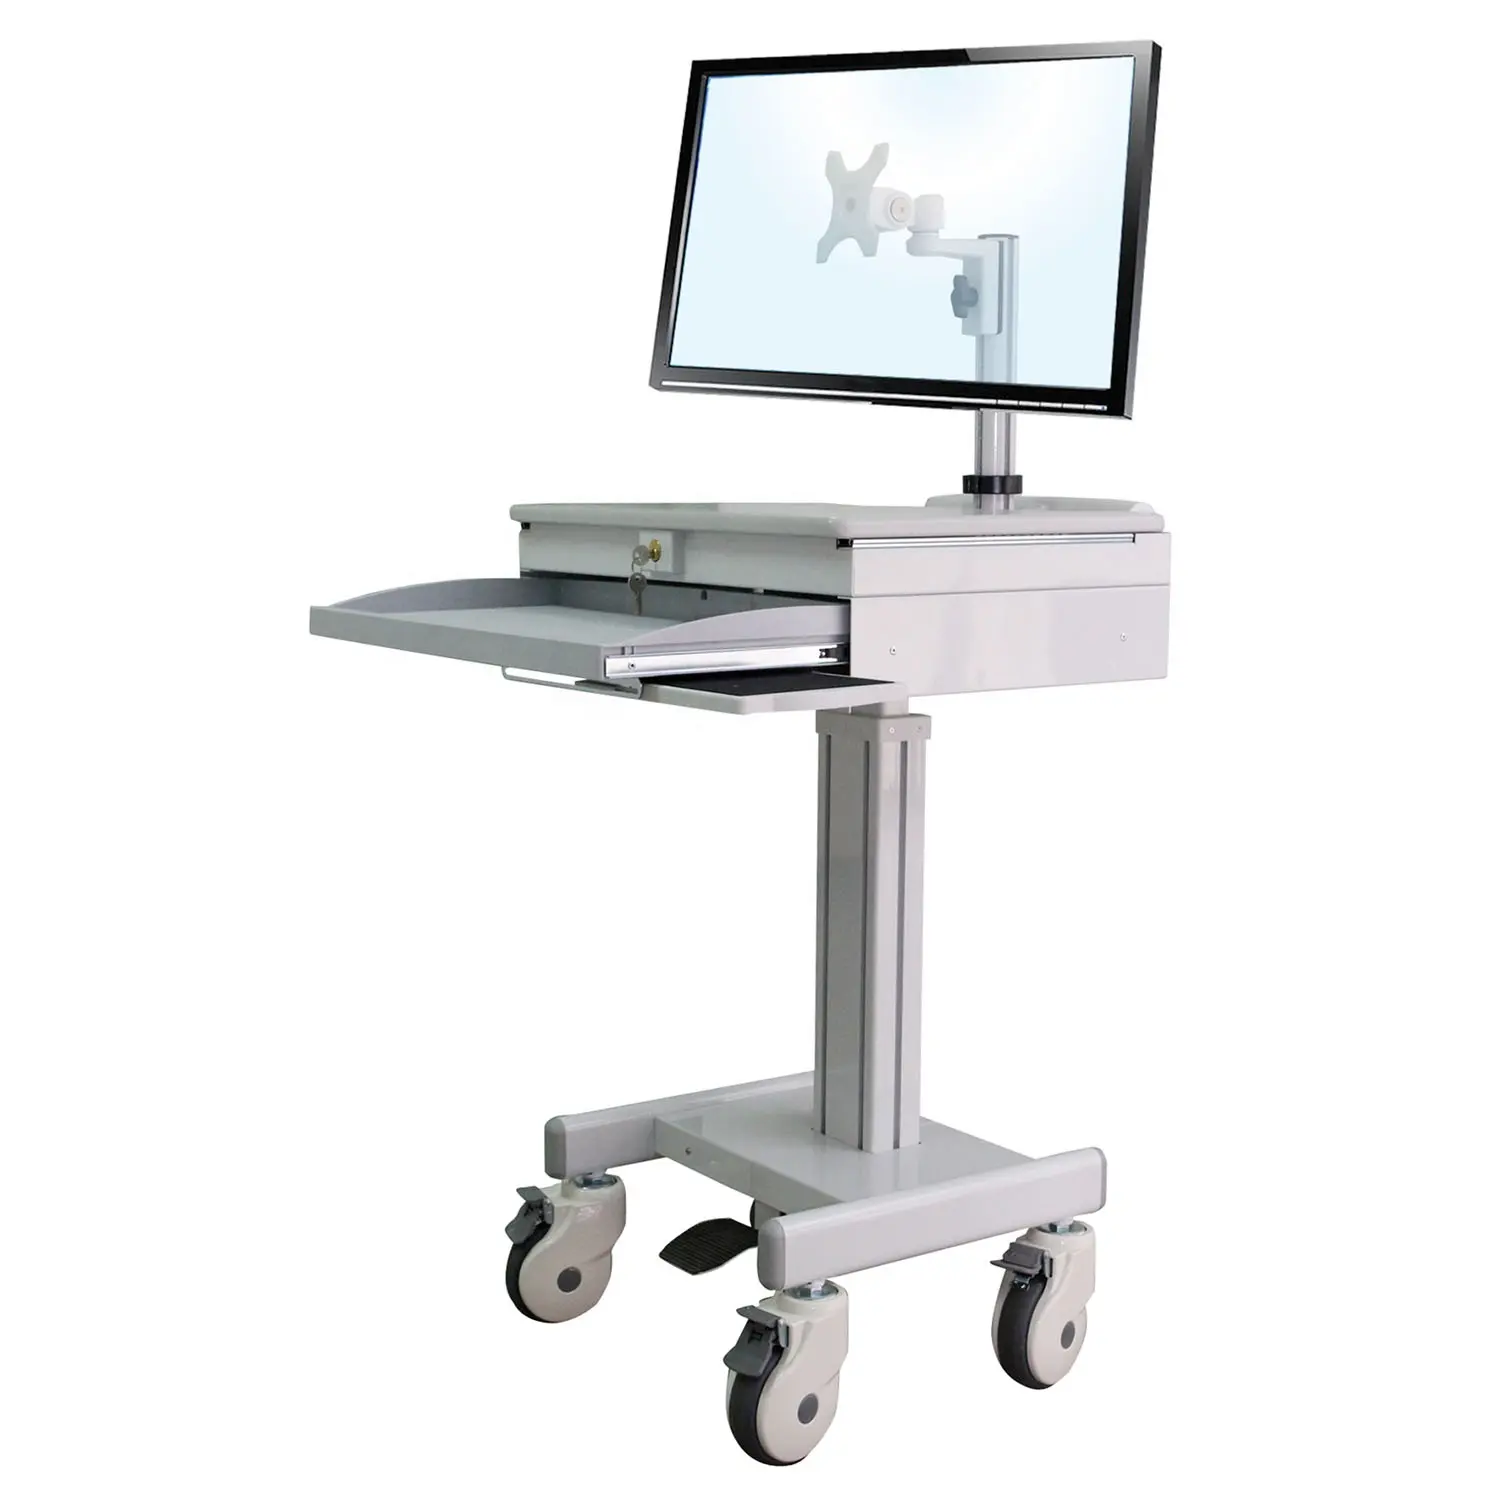 Hospital Monitor Trolley Medical Computing Cart Workstation With LCD Arm Support 1 Monitor And Lockable Laptop Storage Space